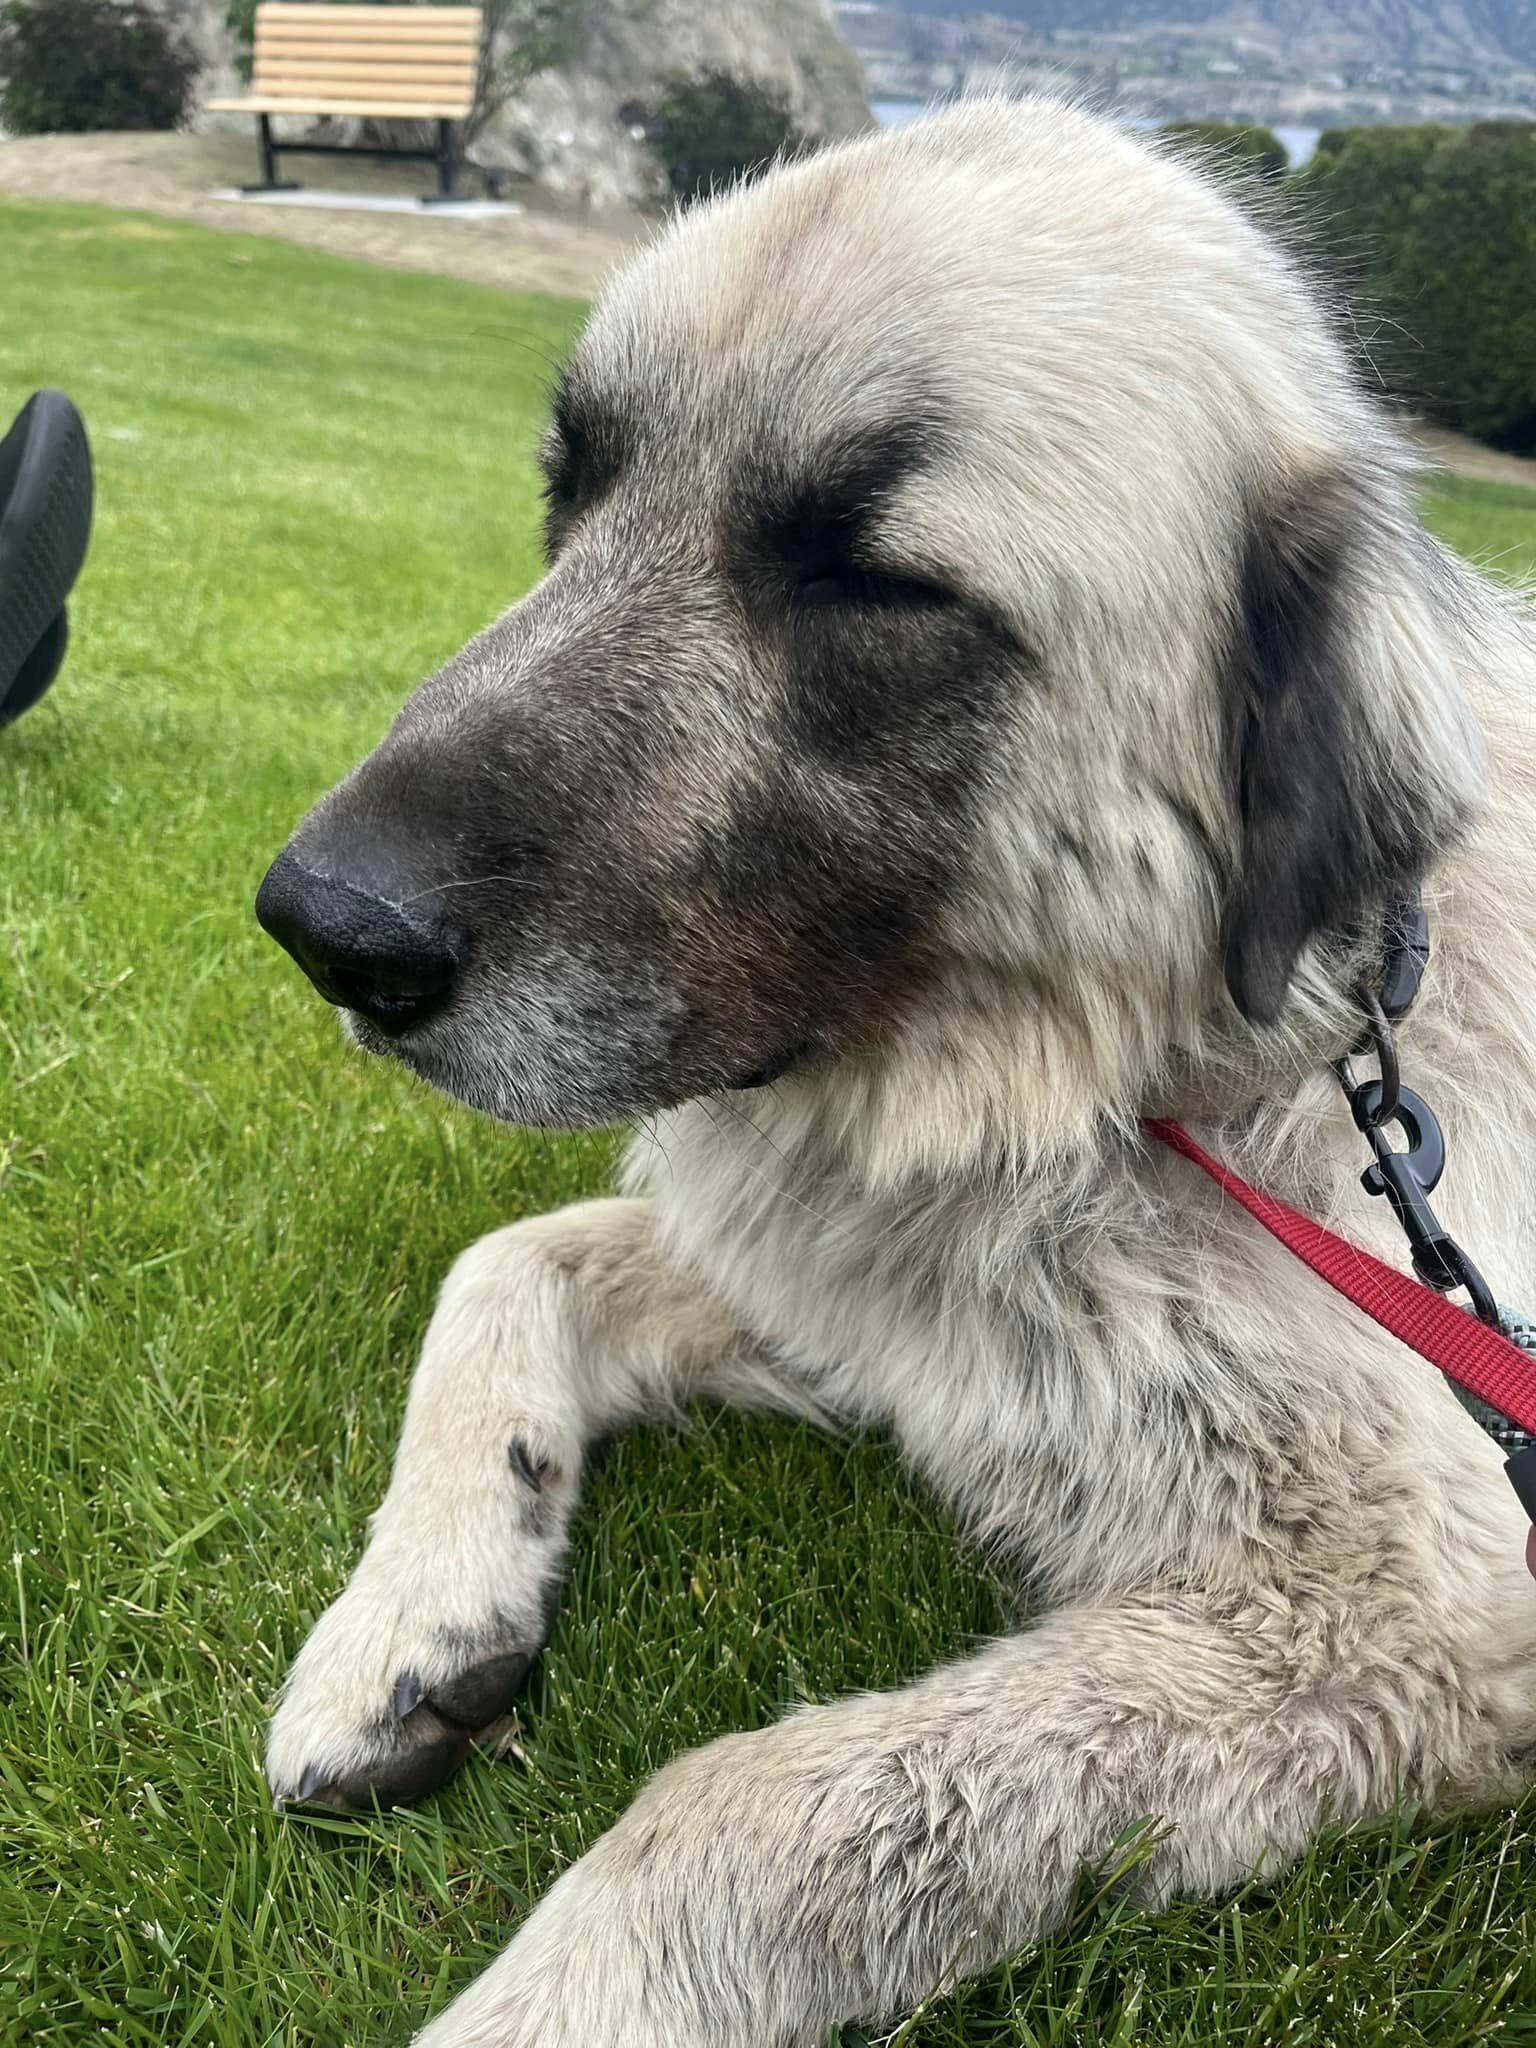 Barley, who was on the run for 10 days, was finally caught 100 kilometres from home in Penticton. He has now been returned to his owners. (Petra’s Pawdicures - Facebook)